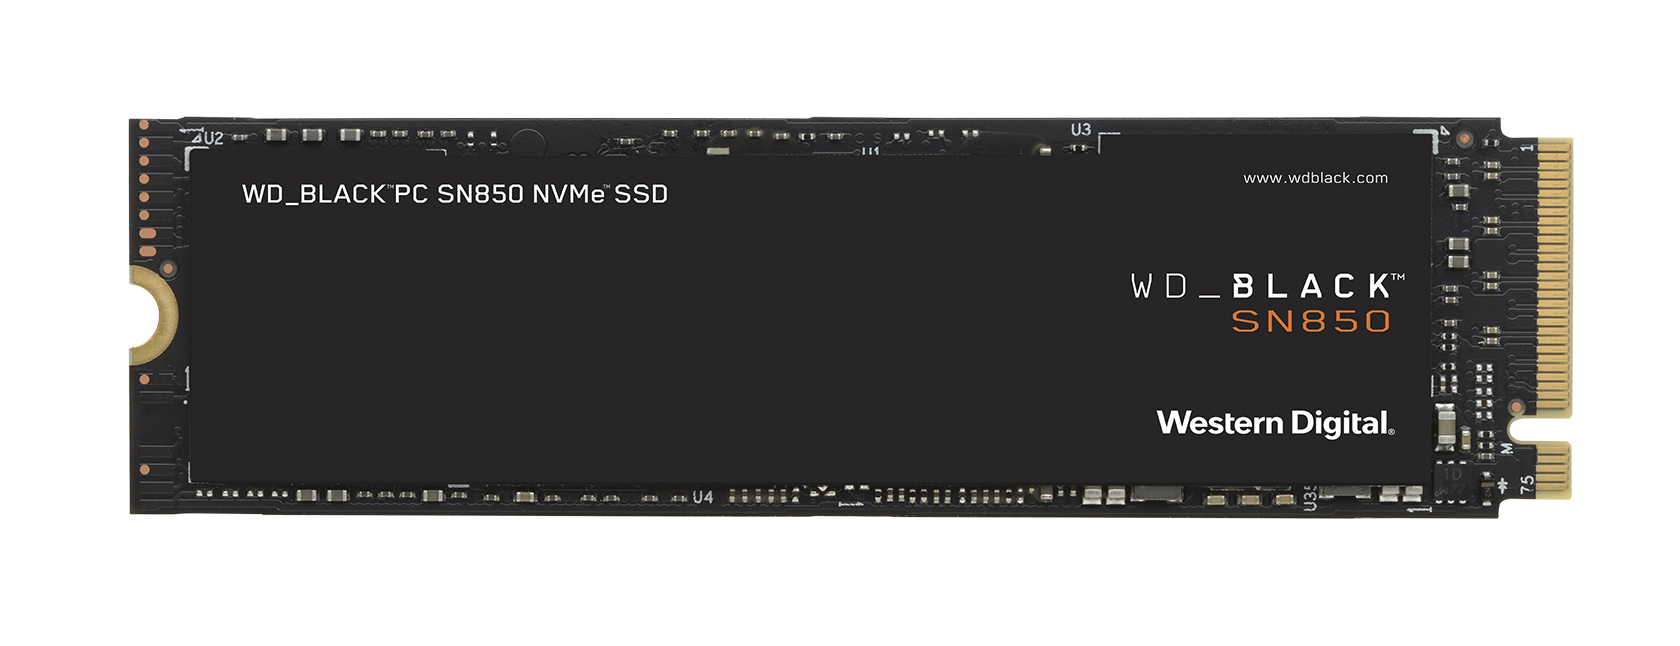 Kingston A2000 NVMe SSD: Fast and cheap, at 10 cents per gigabyte